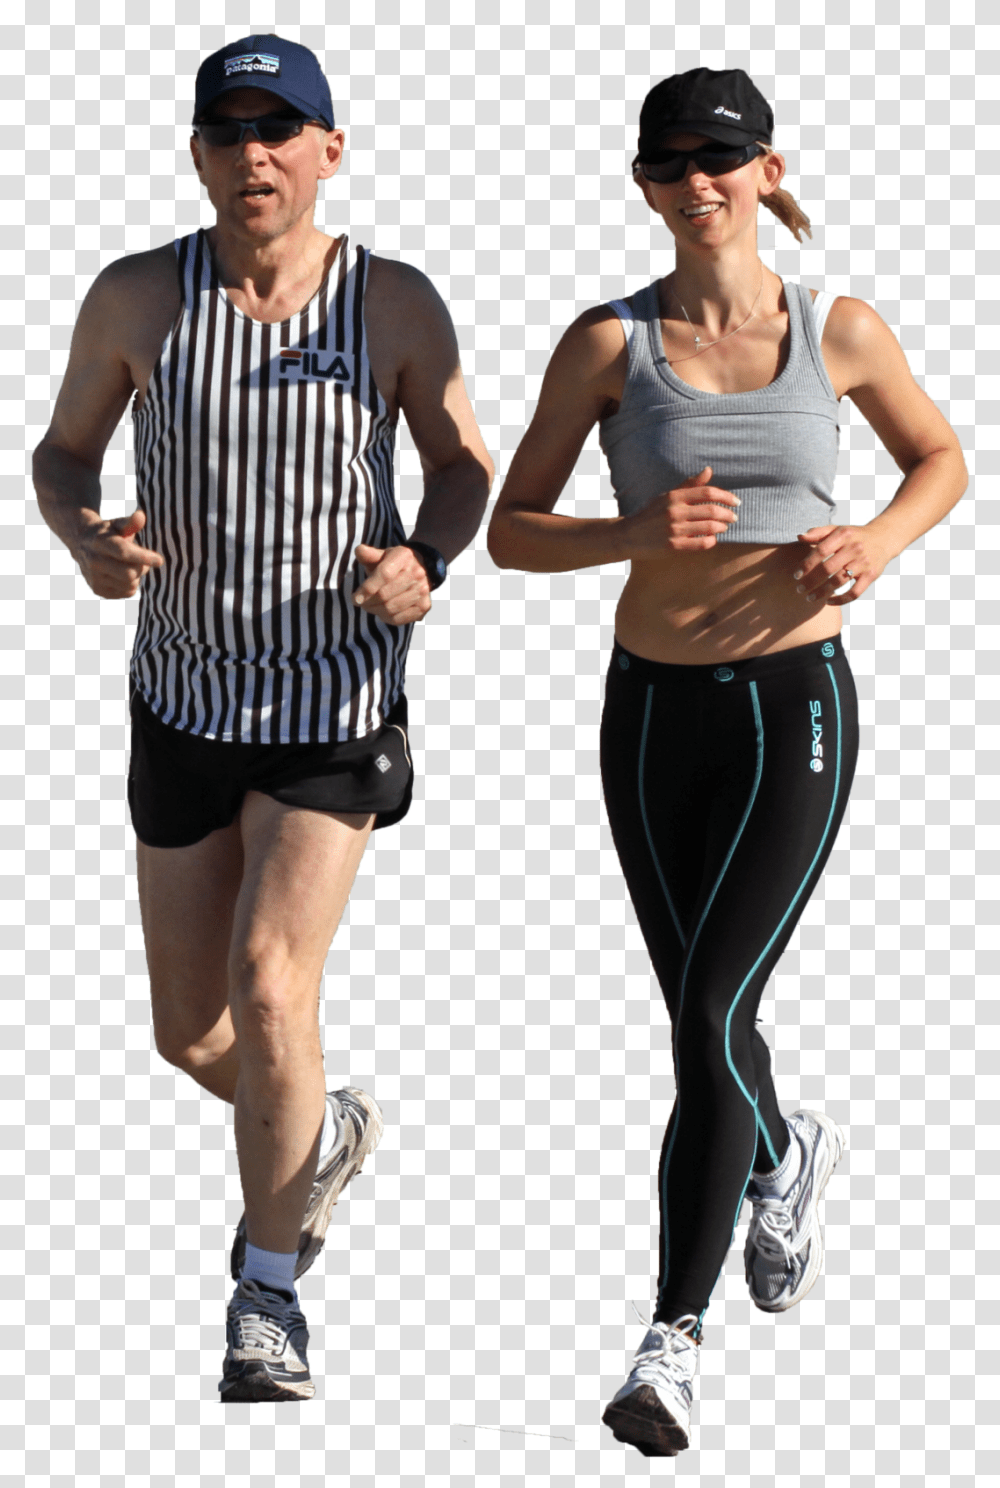 Running People Image People Running, Person, Clothing, Sunglasses, Accessories Transparent Png